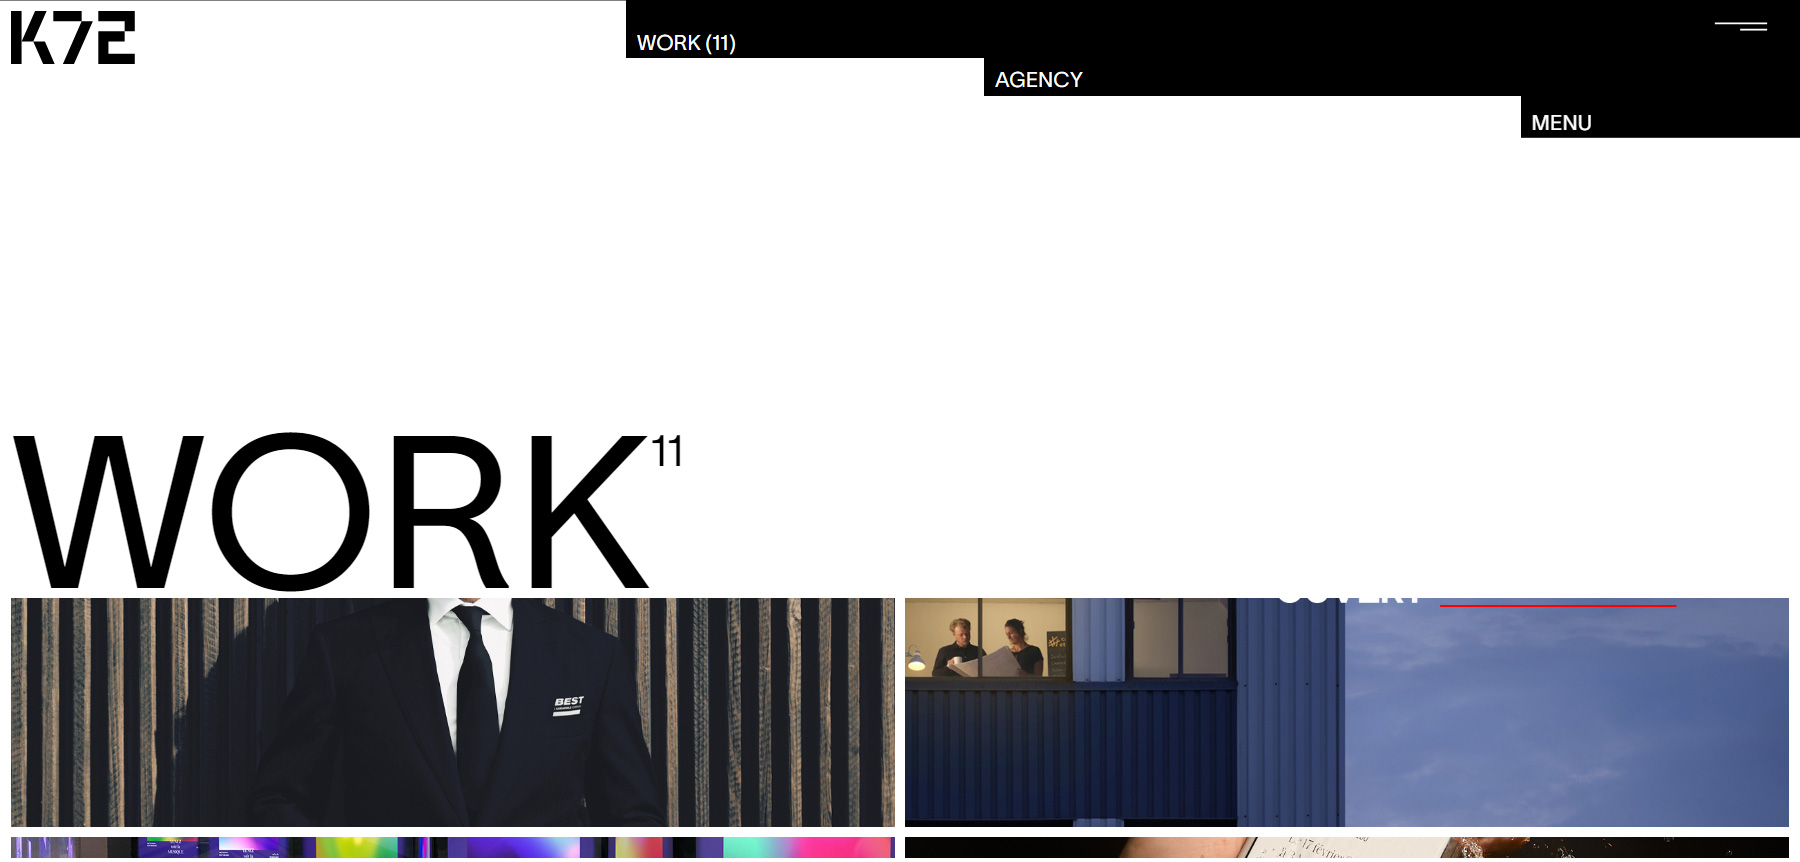 K72 - Website of the Day